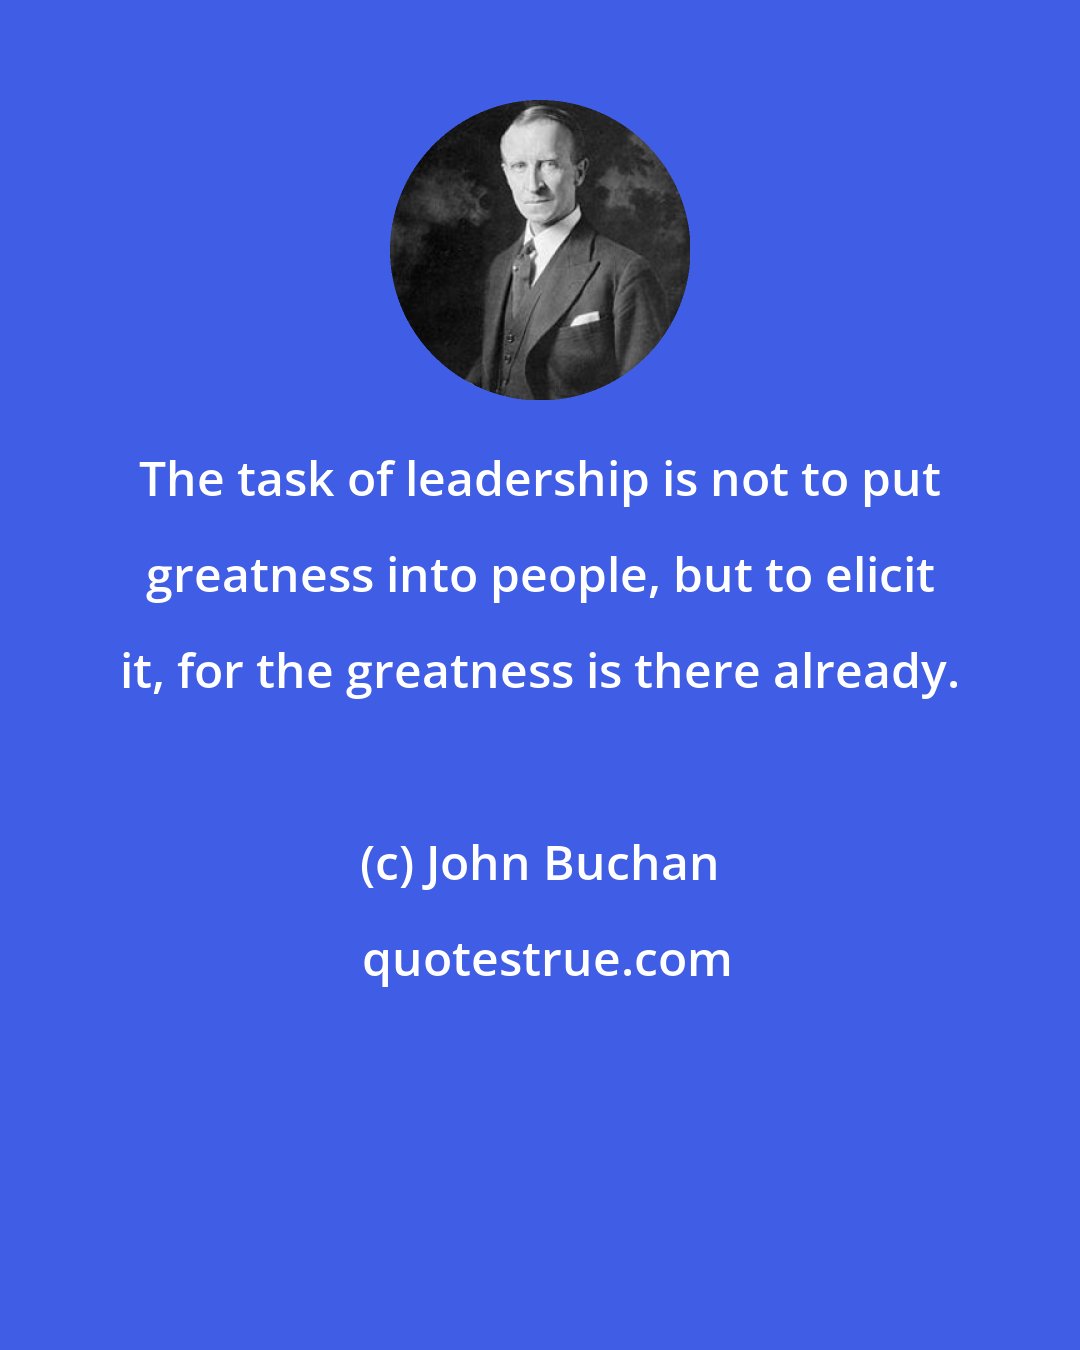 John Buchan: The task of leadership is not to put greatness into people, but to elicit it, for the greatness is there already.